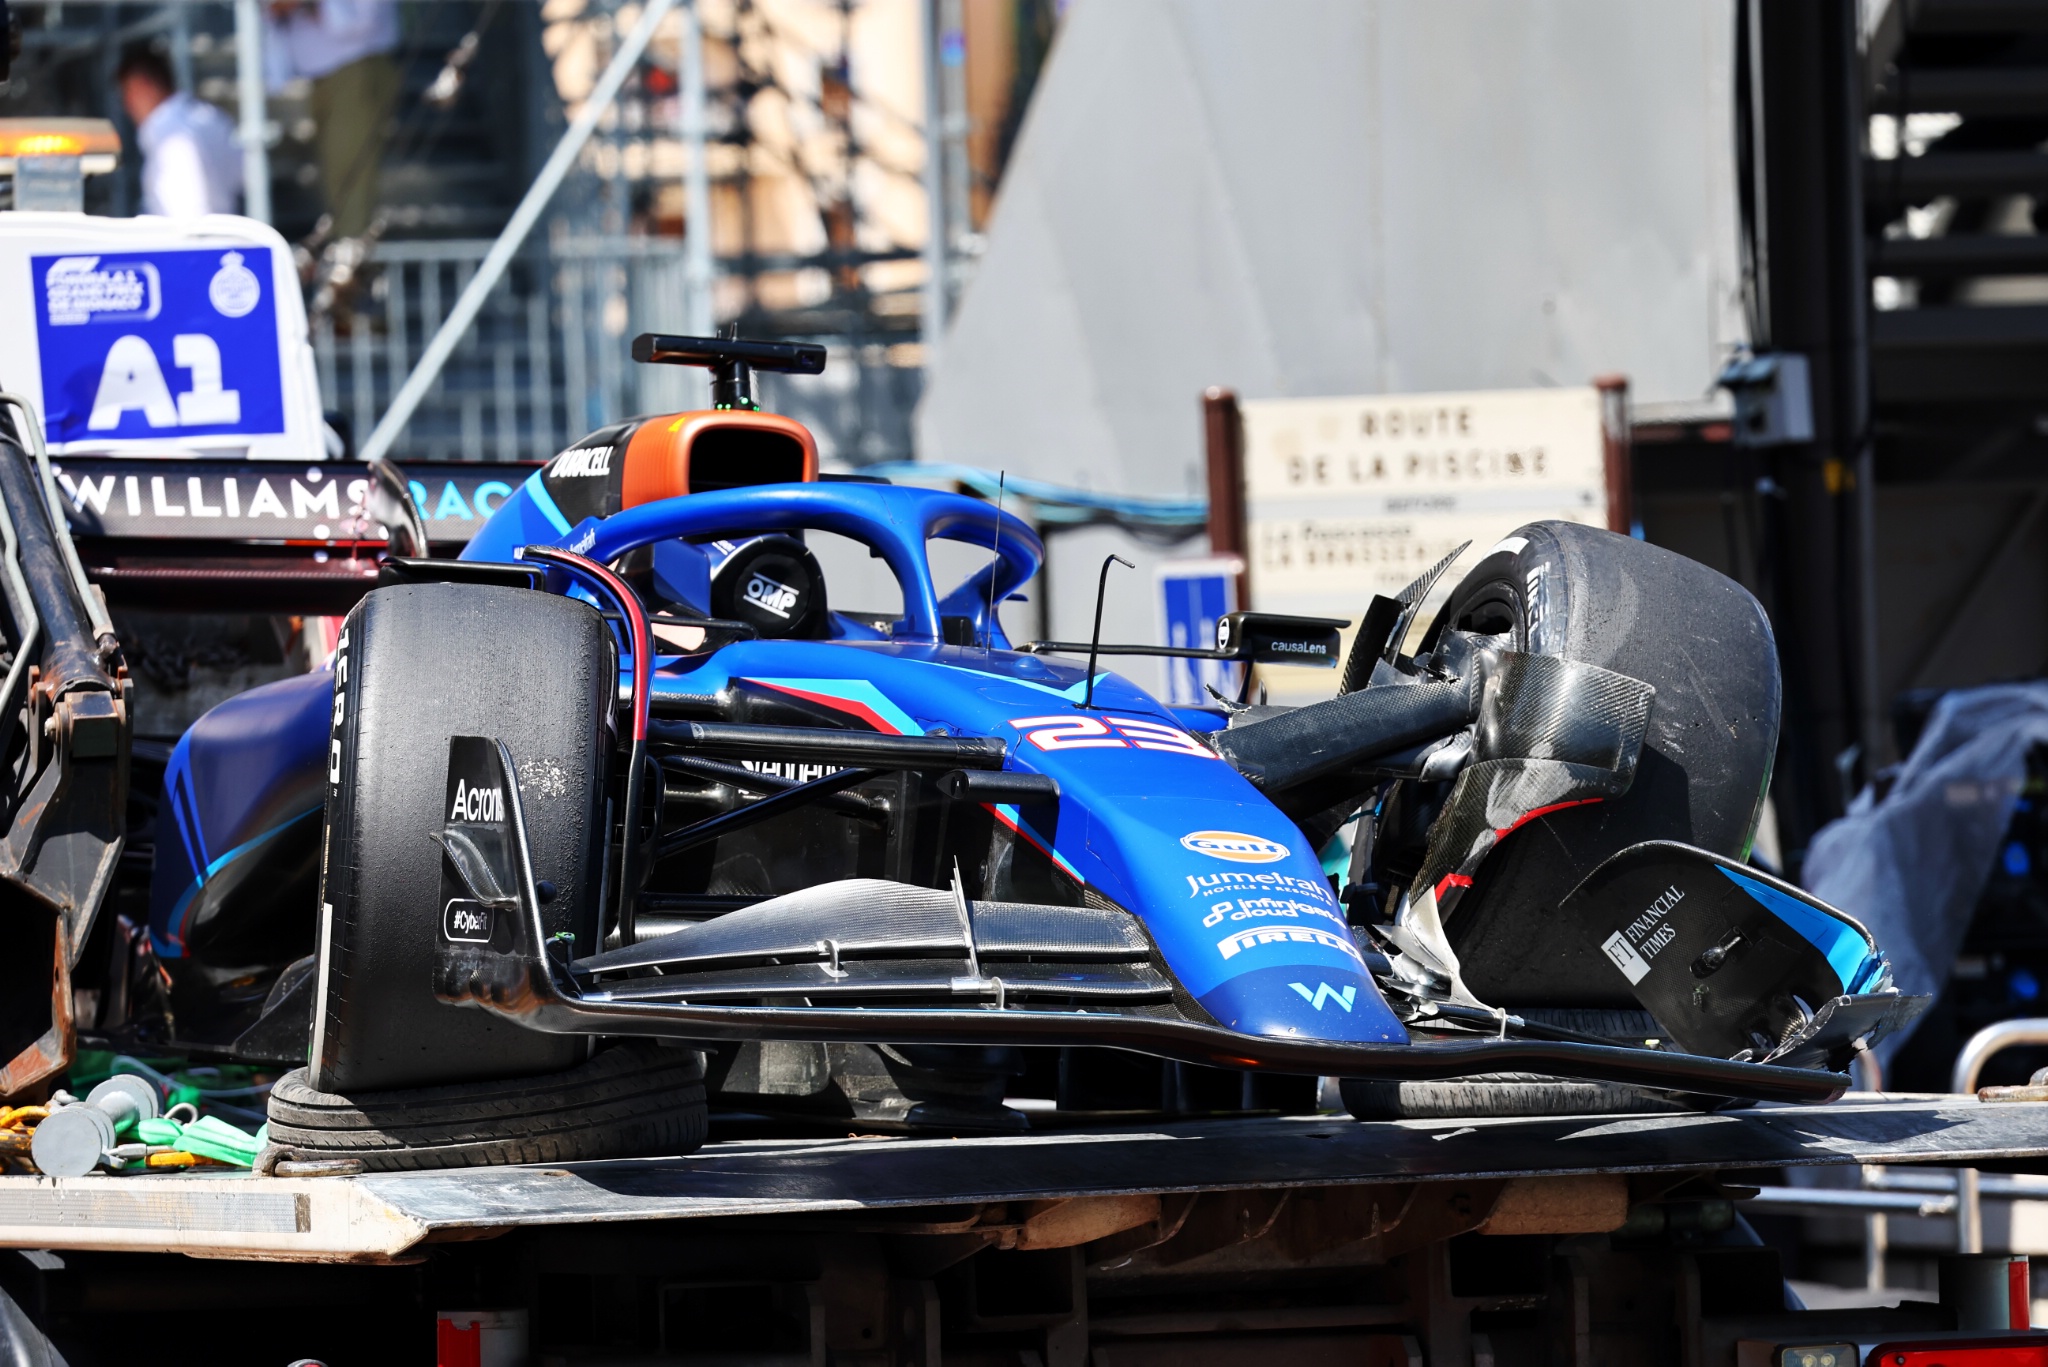 The Williams Racing FW45 of Alexander Albon (THA) Williams Racing is recovered back to the pits on the back of a truck.